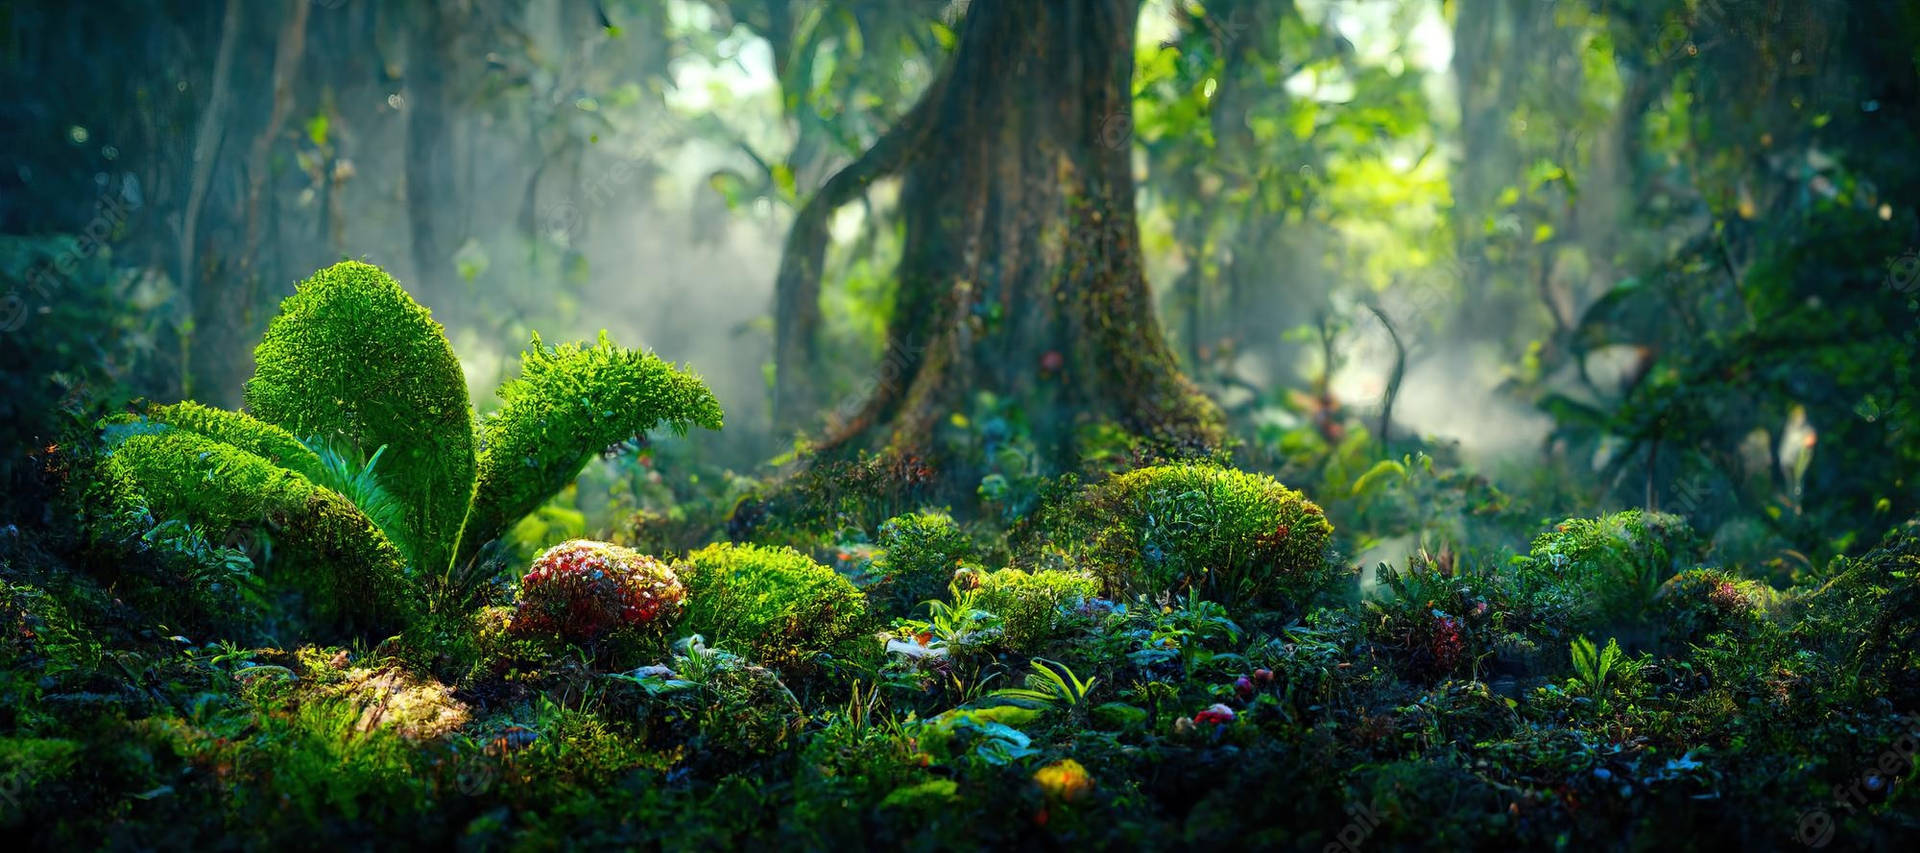 Plants In Enchanted Forest Up-close Wallpaper